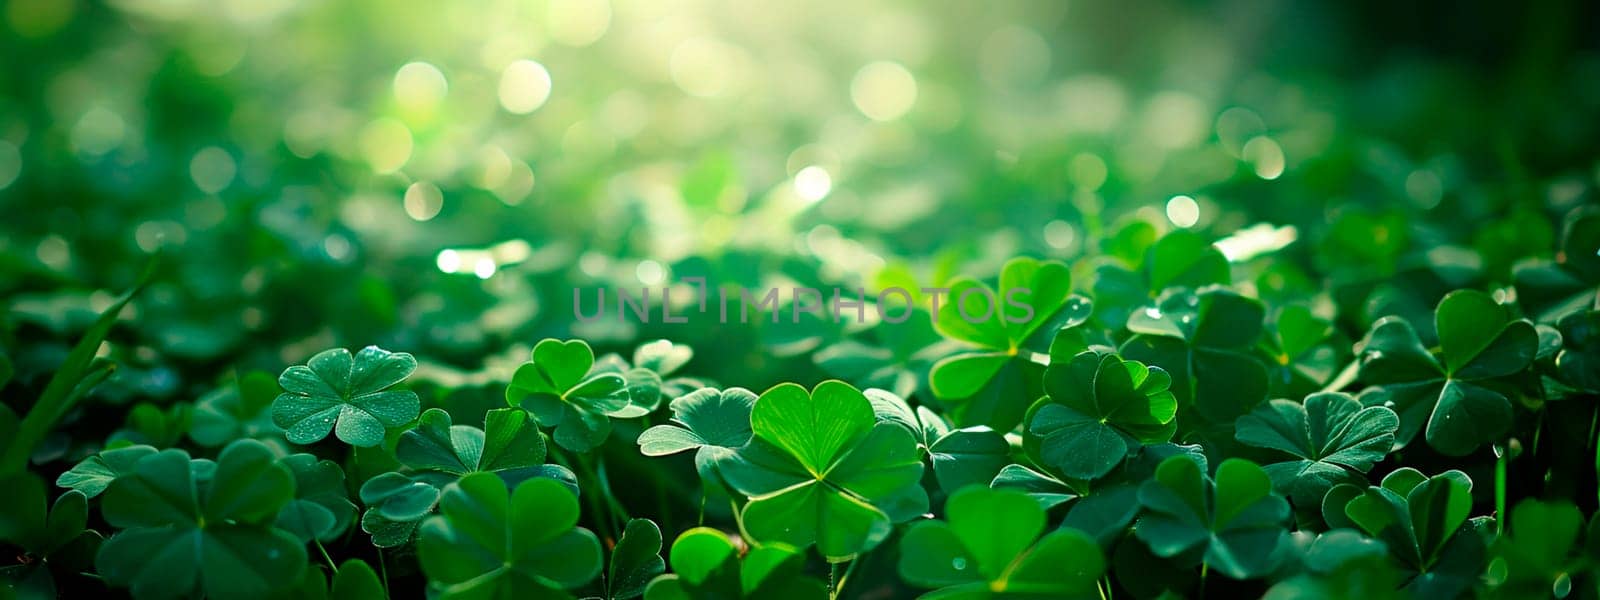 Real clover leaves for St. Patrick's Day. Selective focus. Nature.